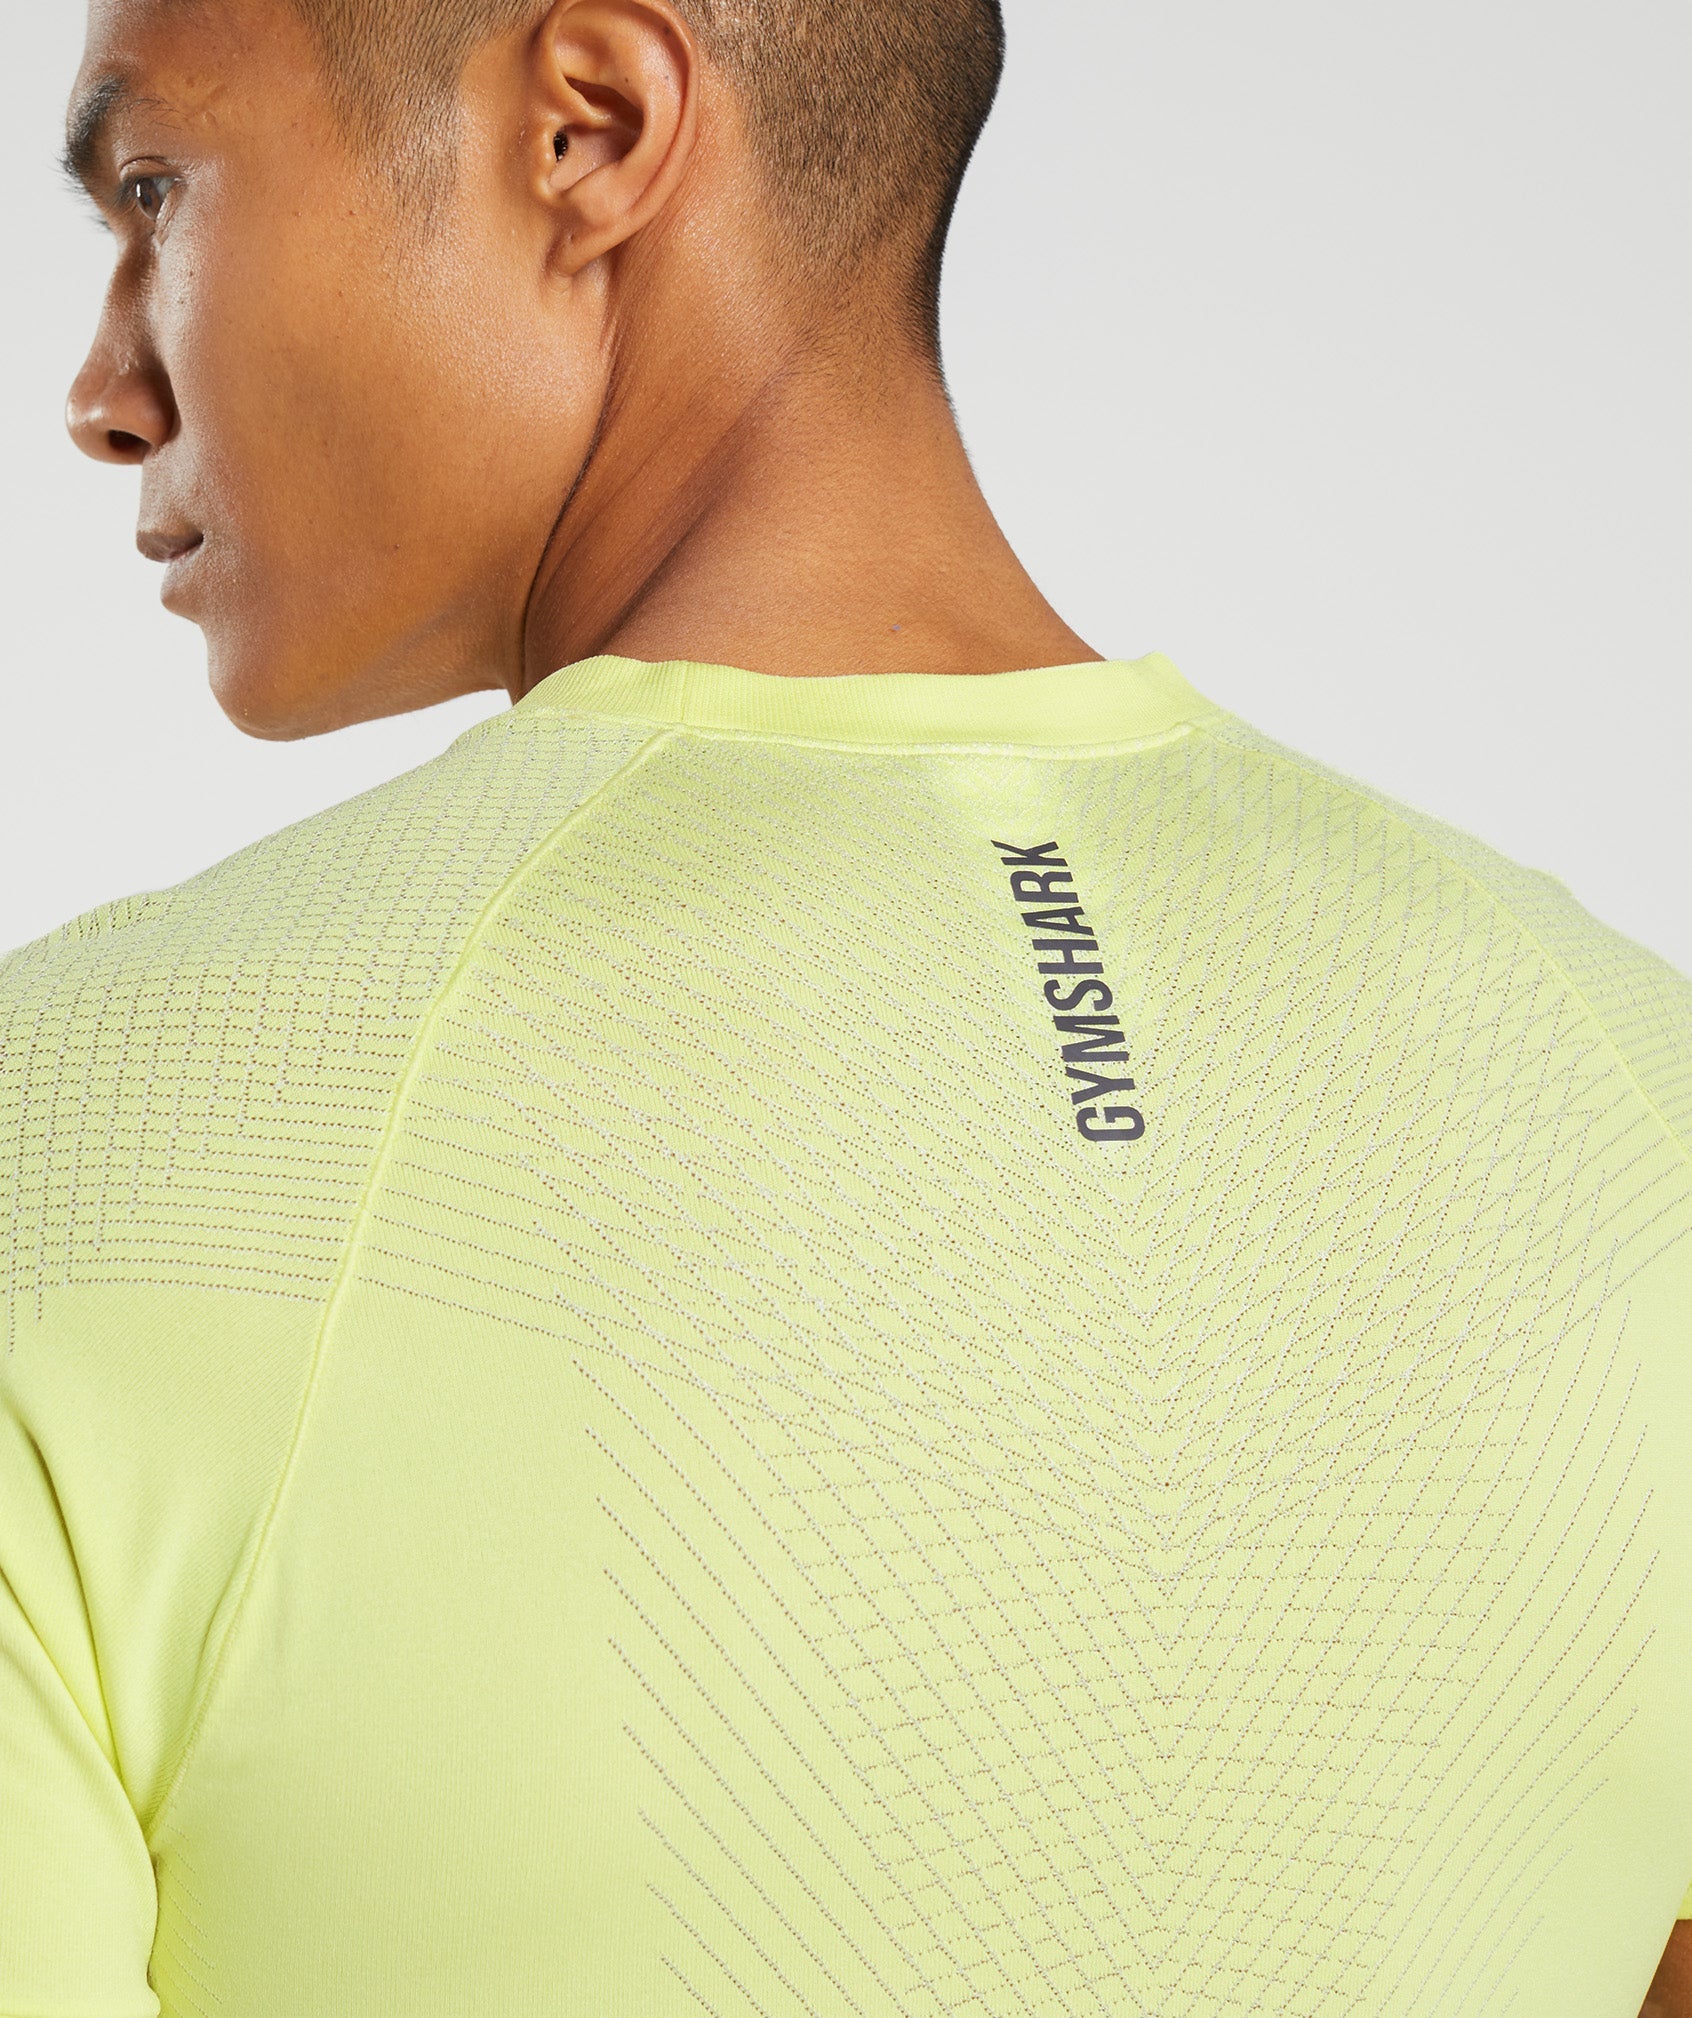 Apex Seamless T-Shirt in Firefly Green/White - view 6